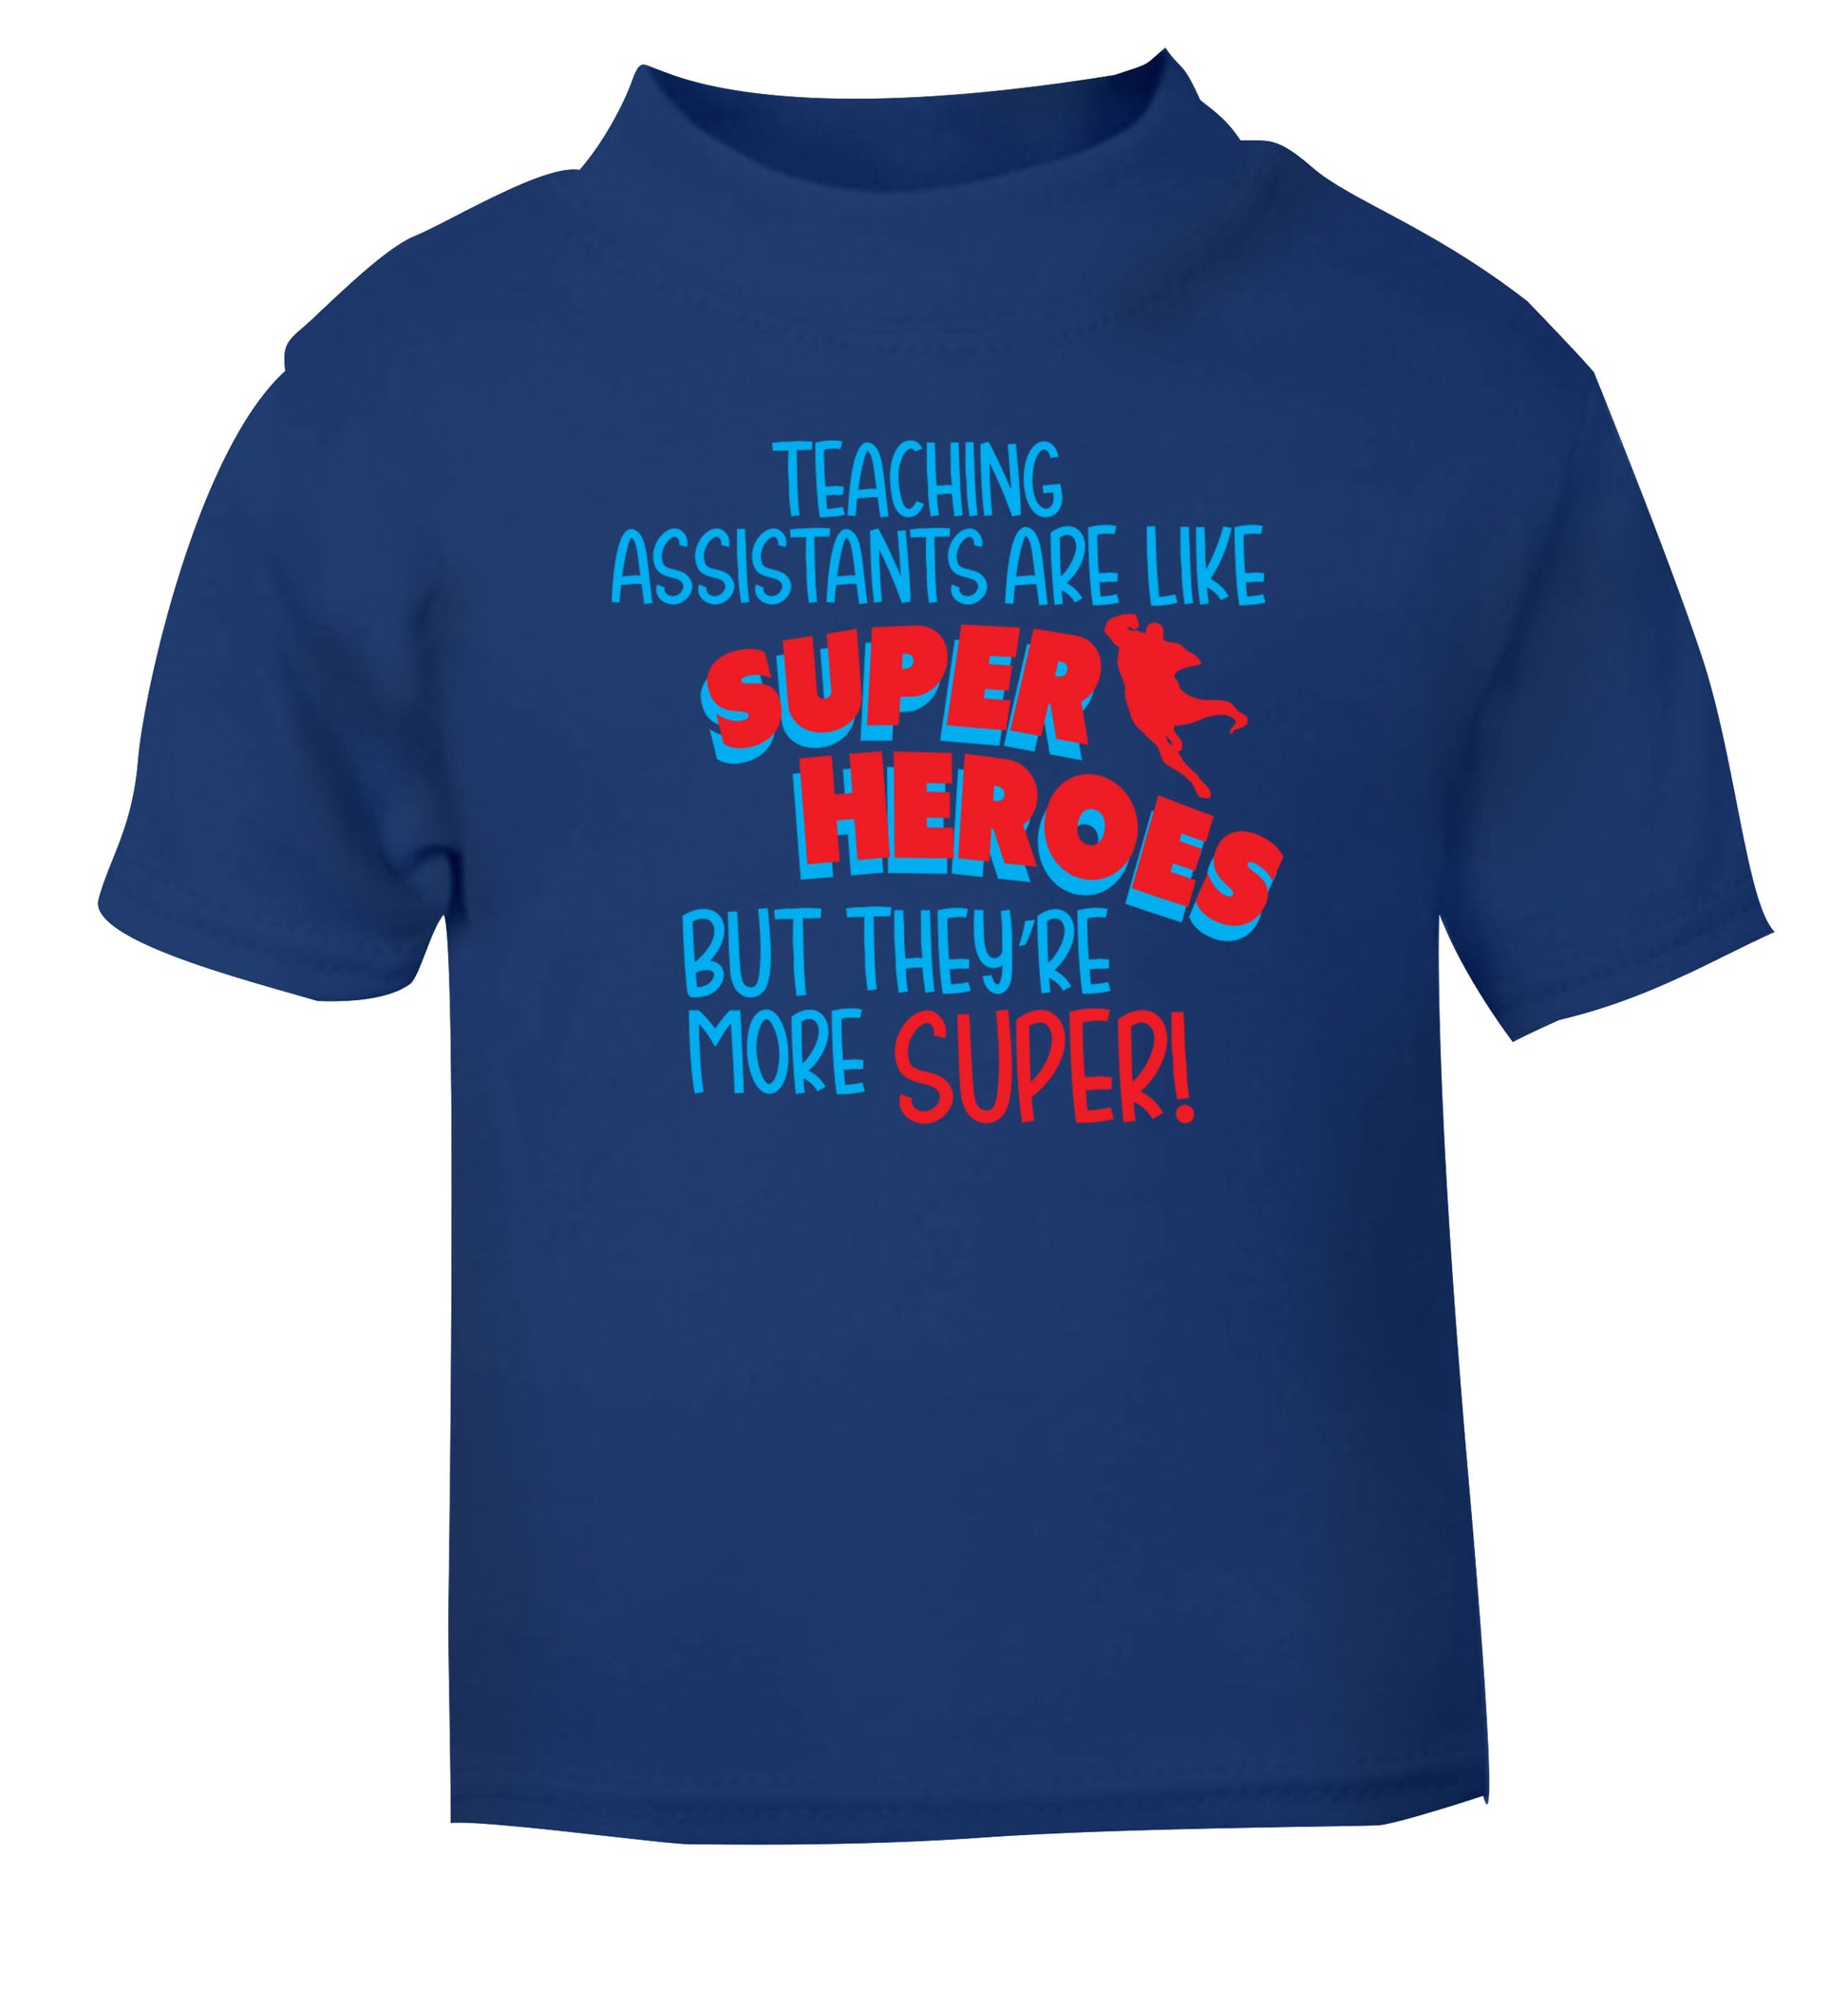 Teaching assistants are like superheros but they're more super blue Baby Toddler Tshirt 2 Years